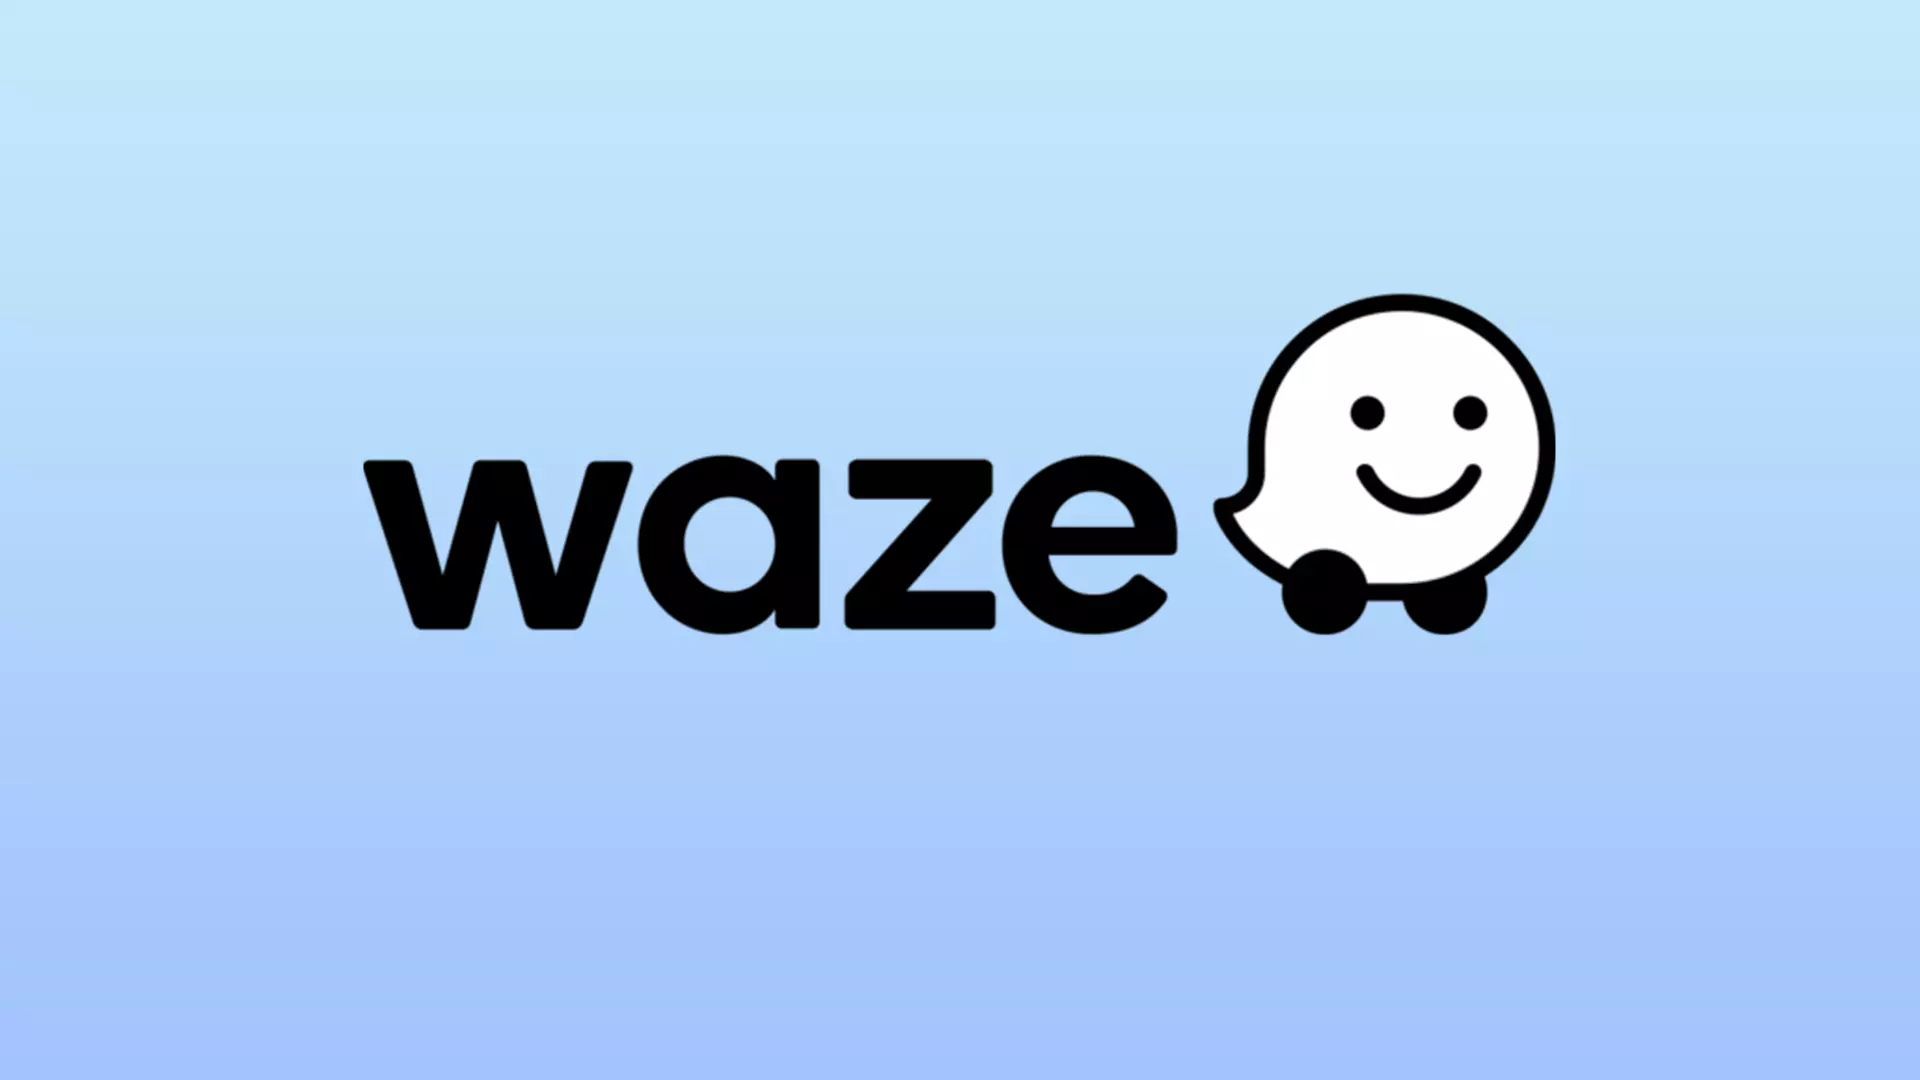 Waze's carpooling service will no longer be available due to a reduction in commuters